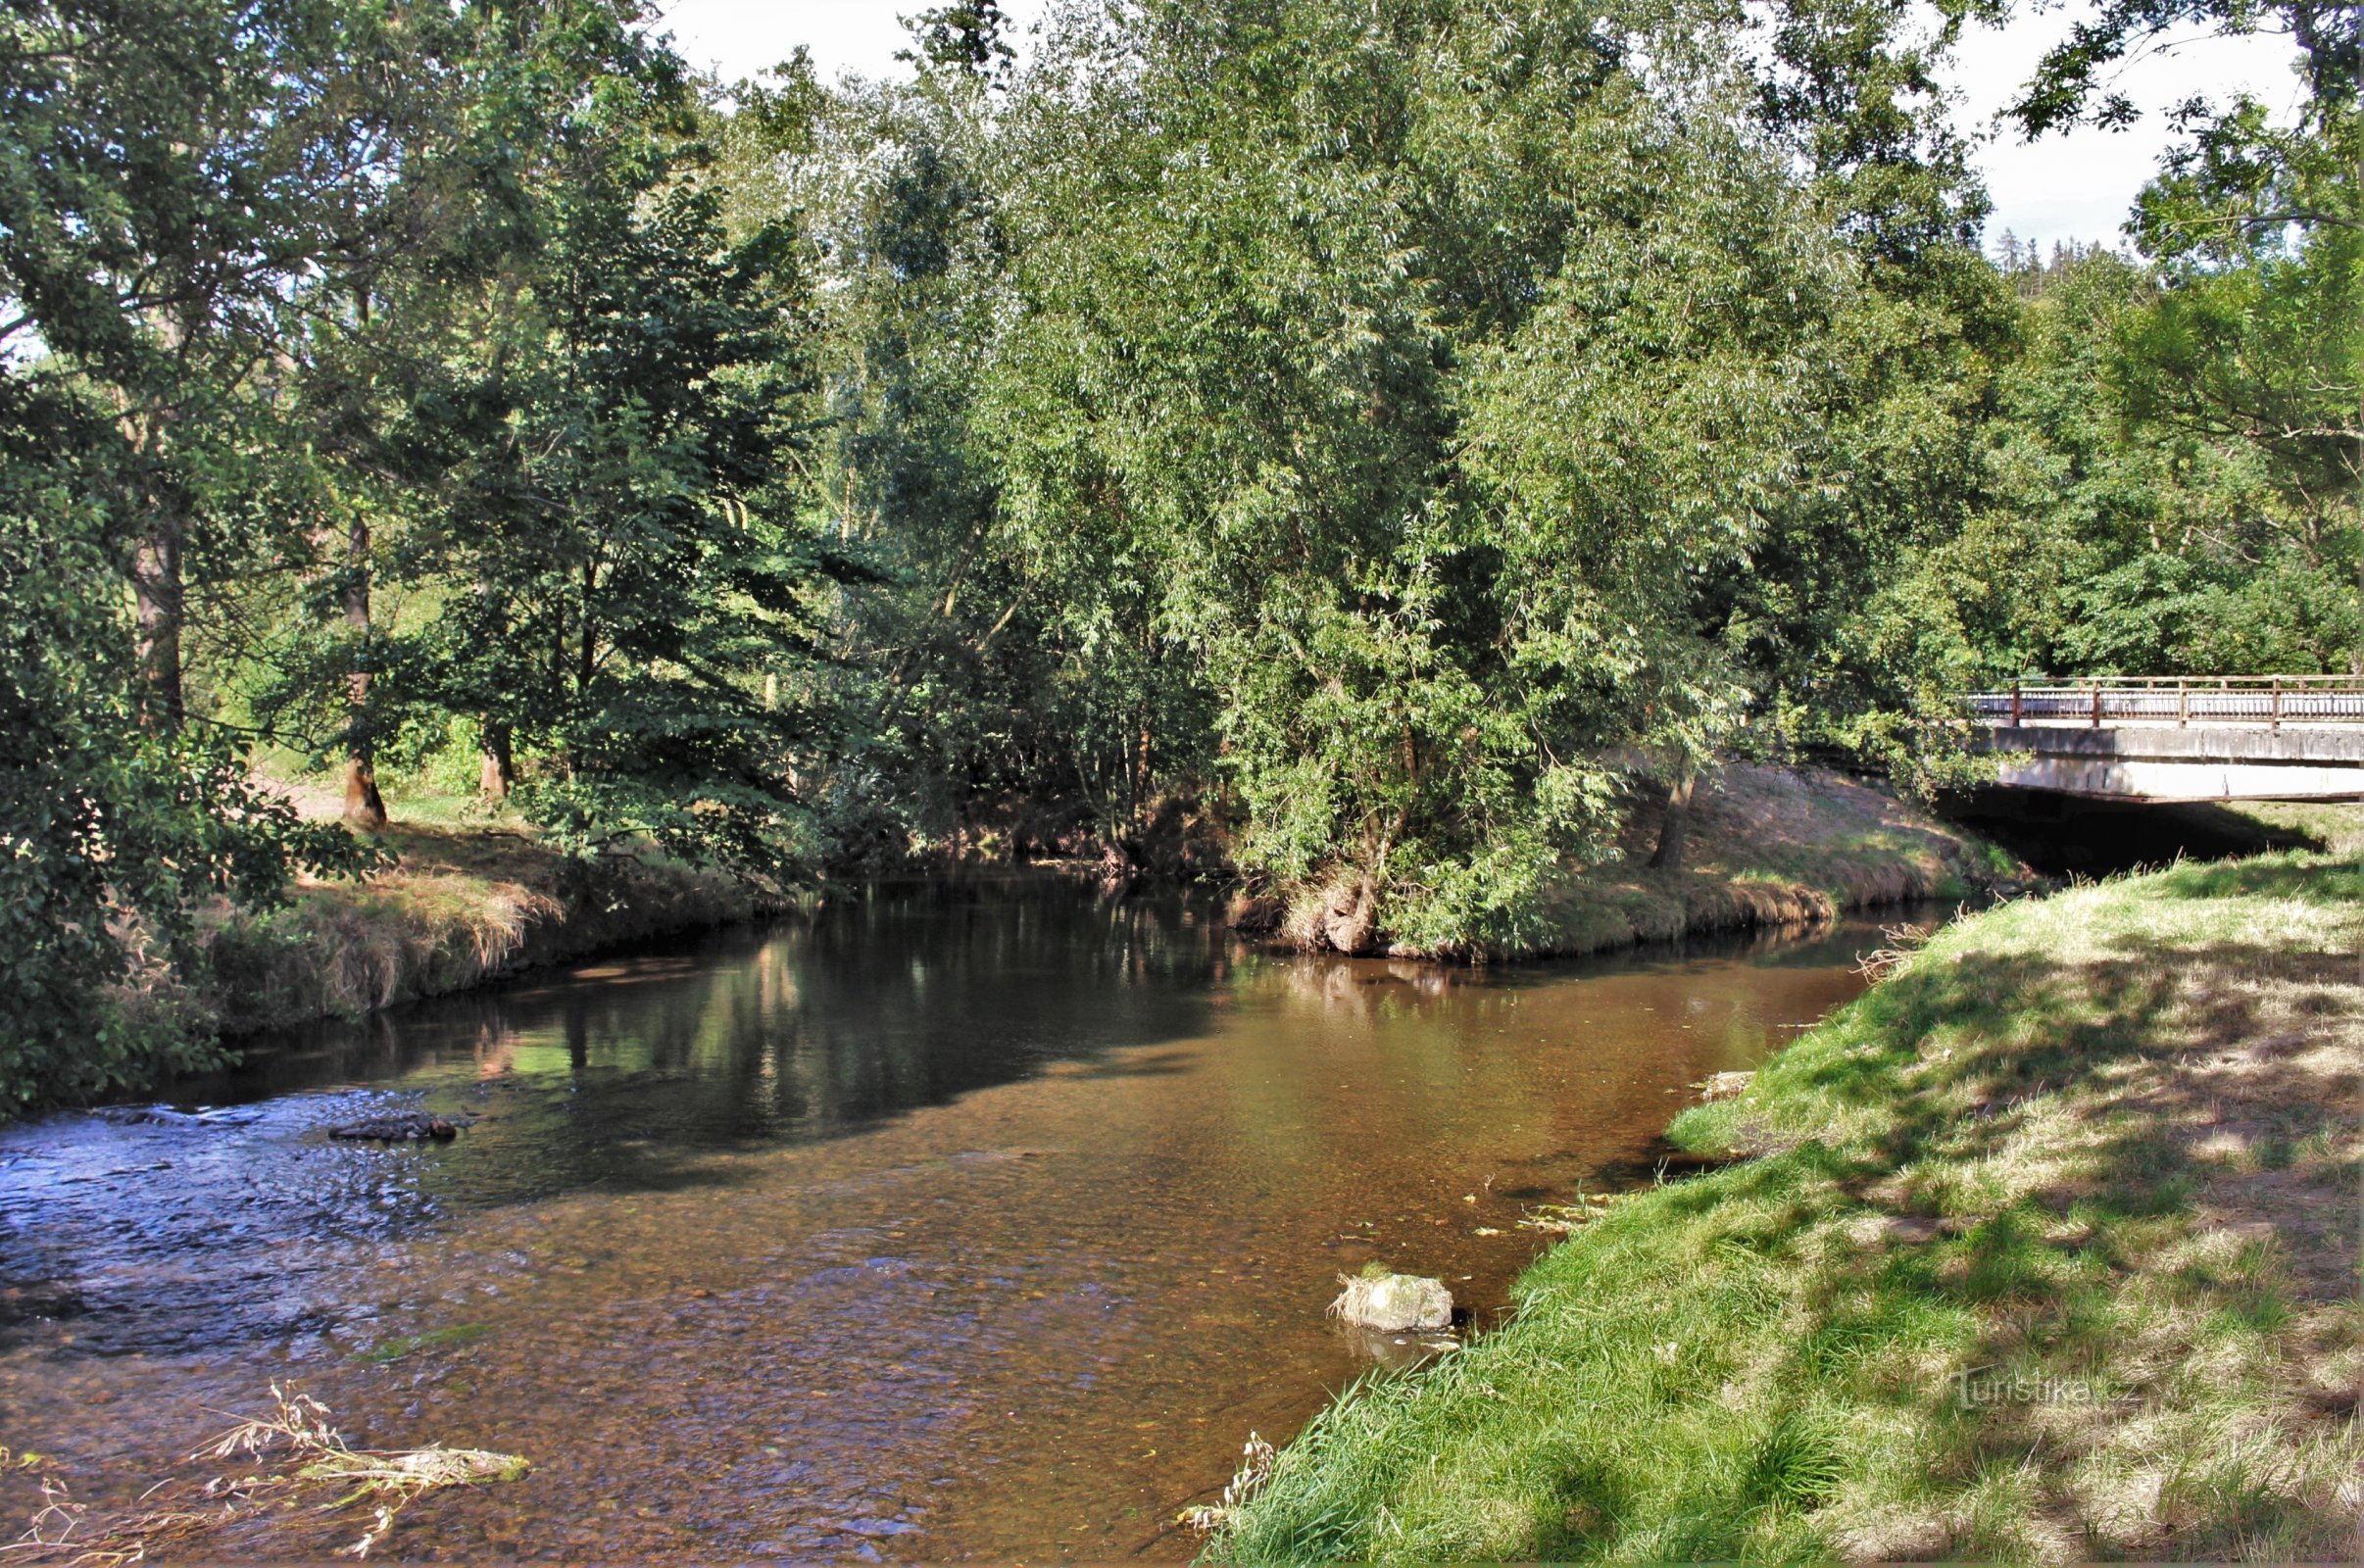 The Svitava River flows from the left, the Bělá River from the bridge from the right